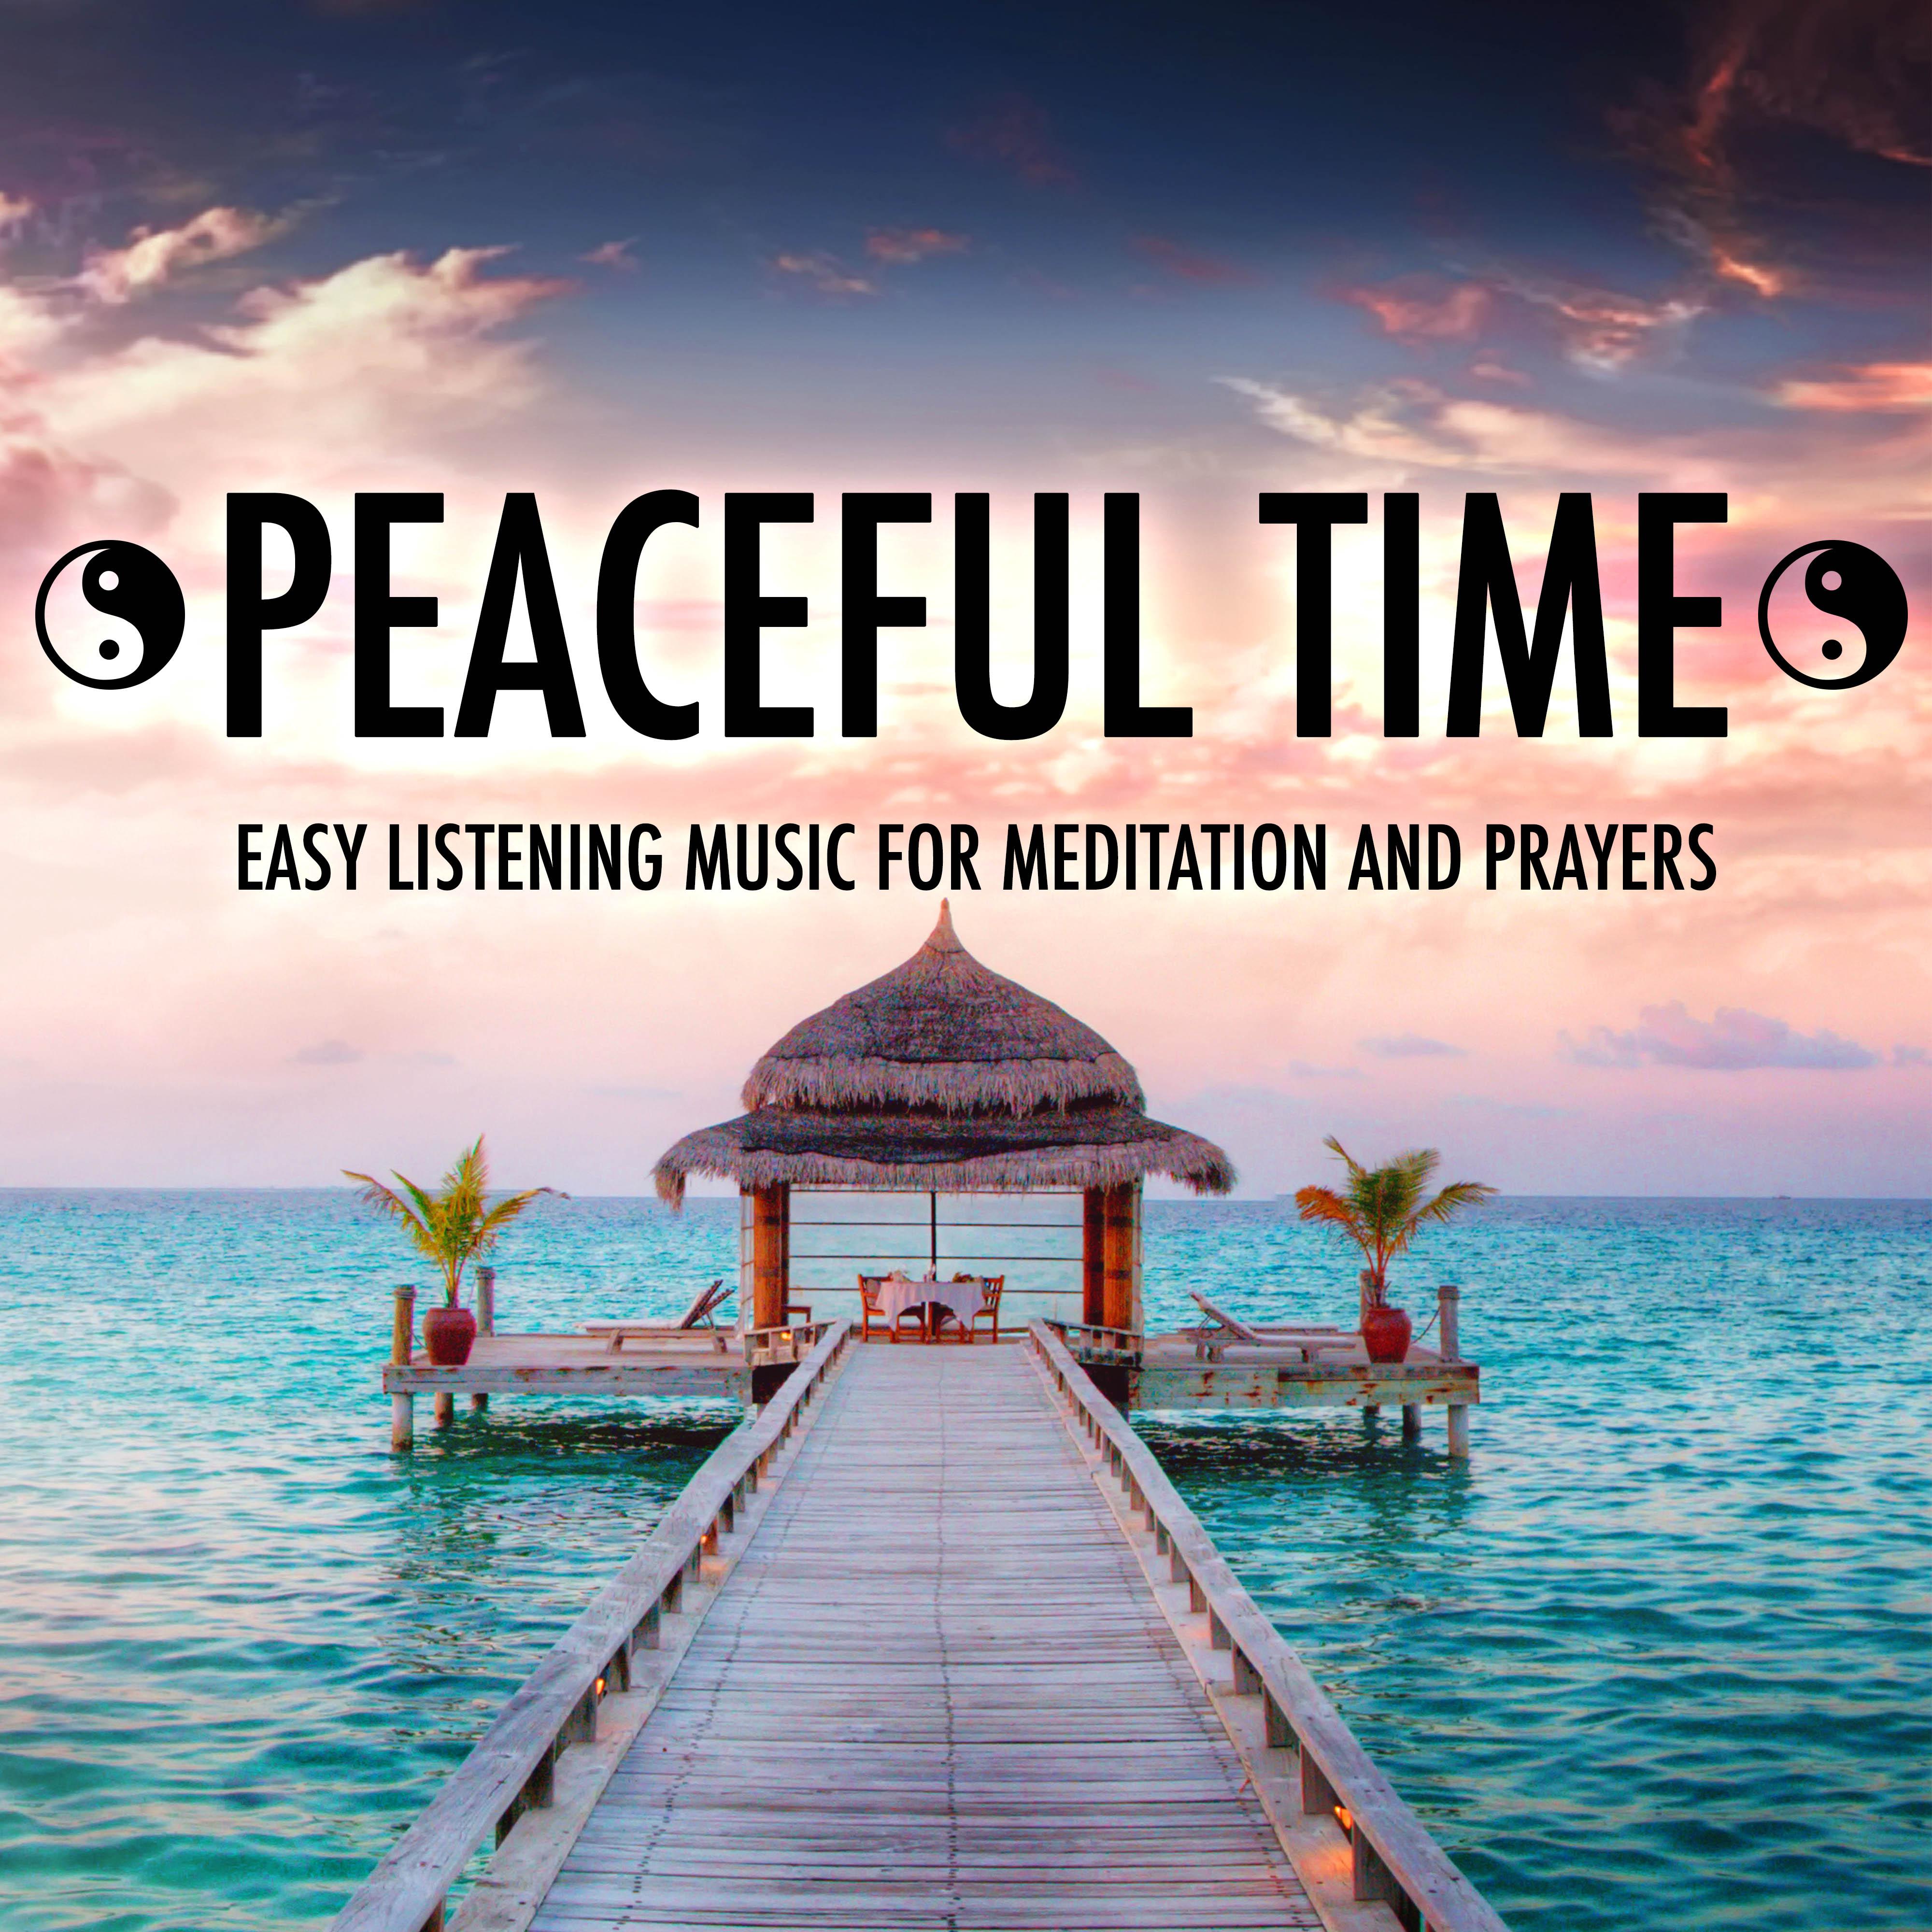 Peaceful Time: Buddhist Easy Listening Music for Spiritual Cleansing, Meditation and Prayers with Nature ambient Sounds